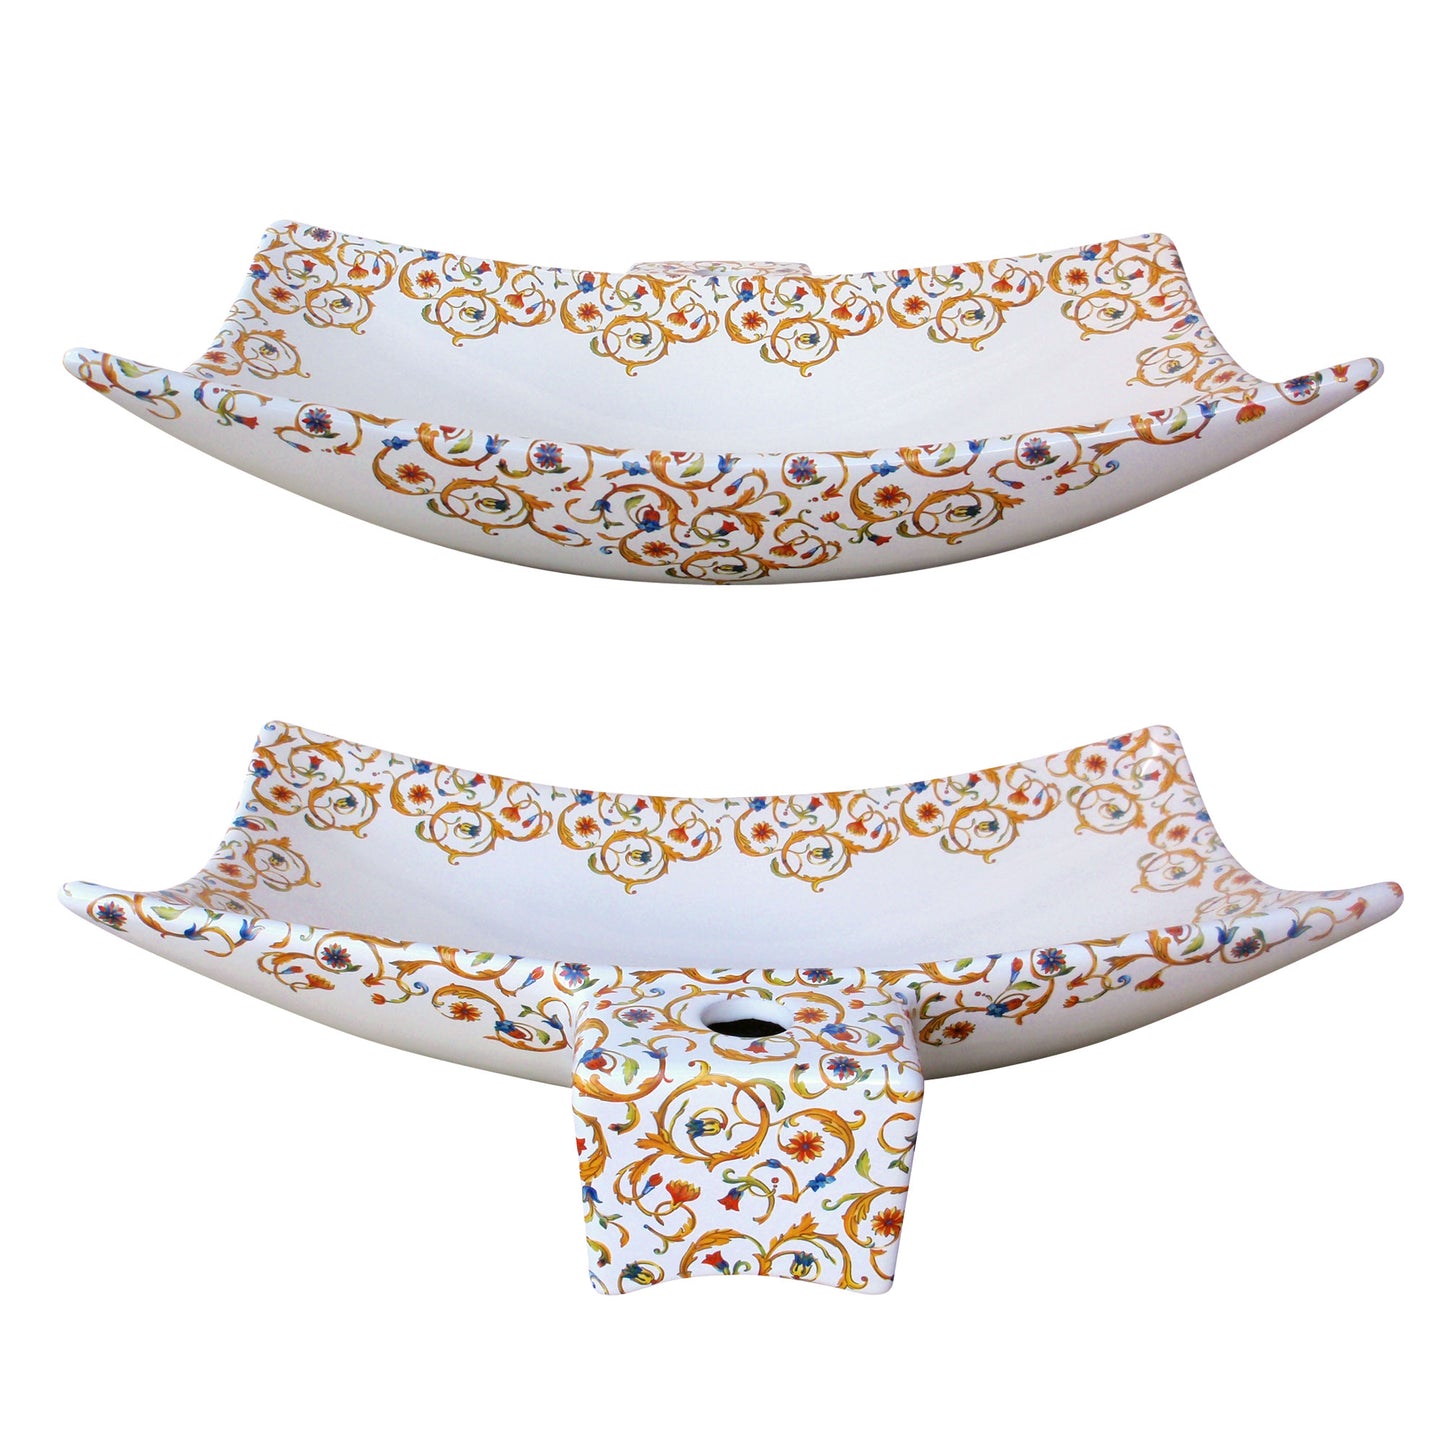 Front and back view  of the modern flat vessel sink painted with gold, red and blue florentine design for sophisticated bathroom or powder room.